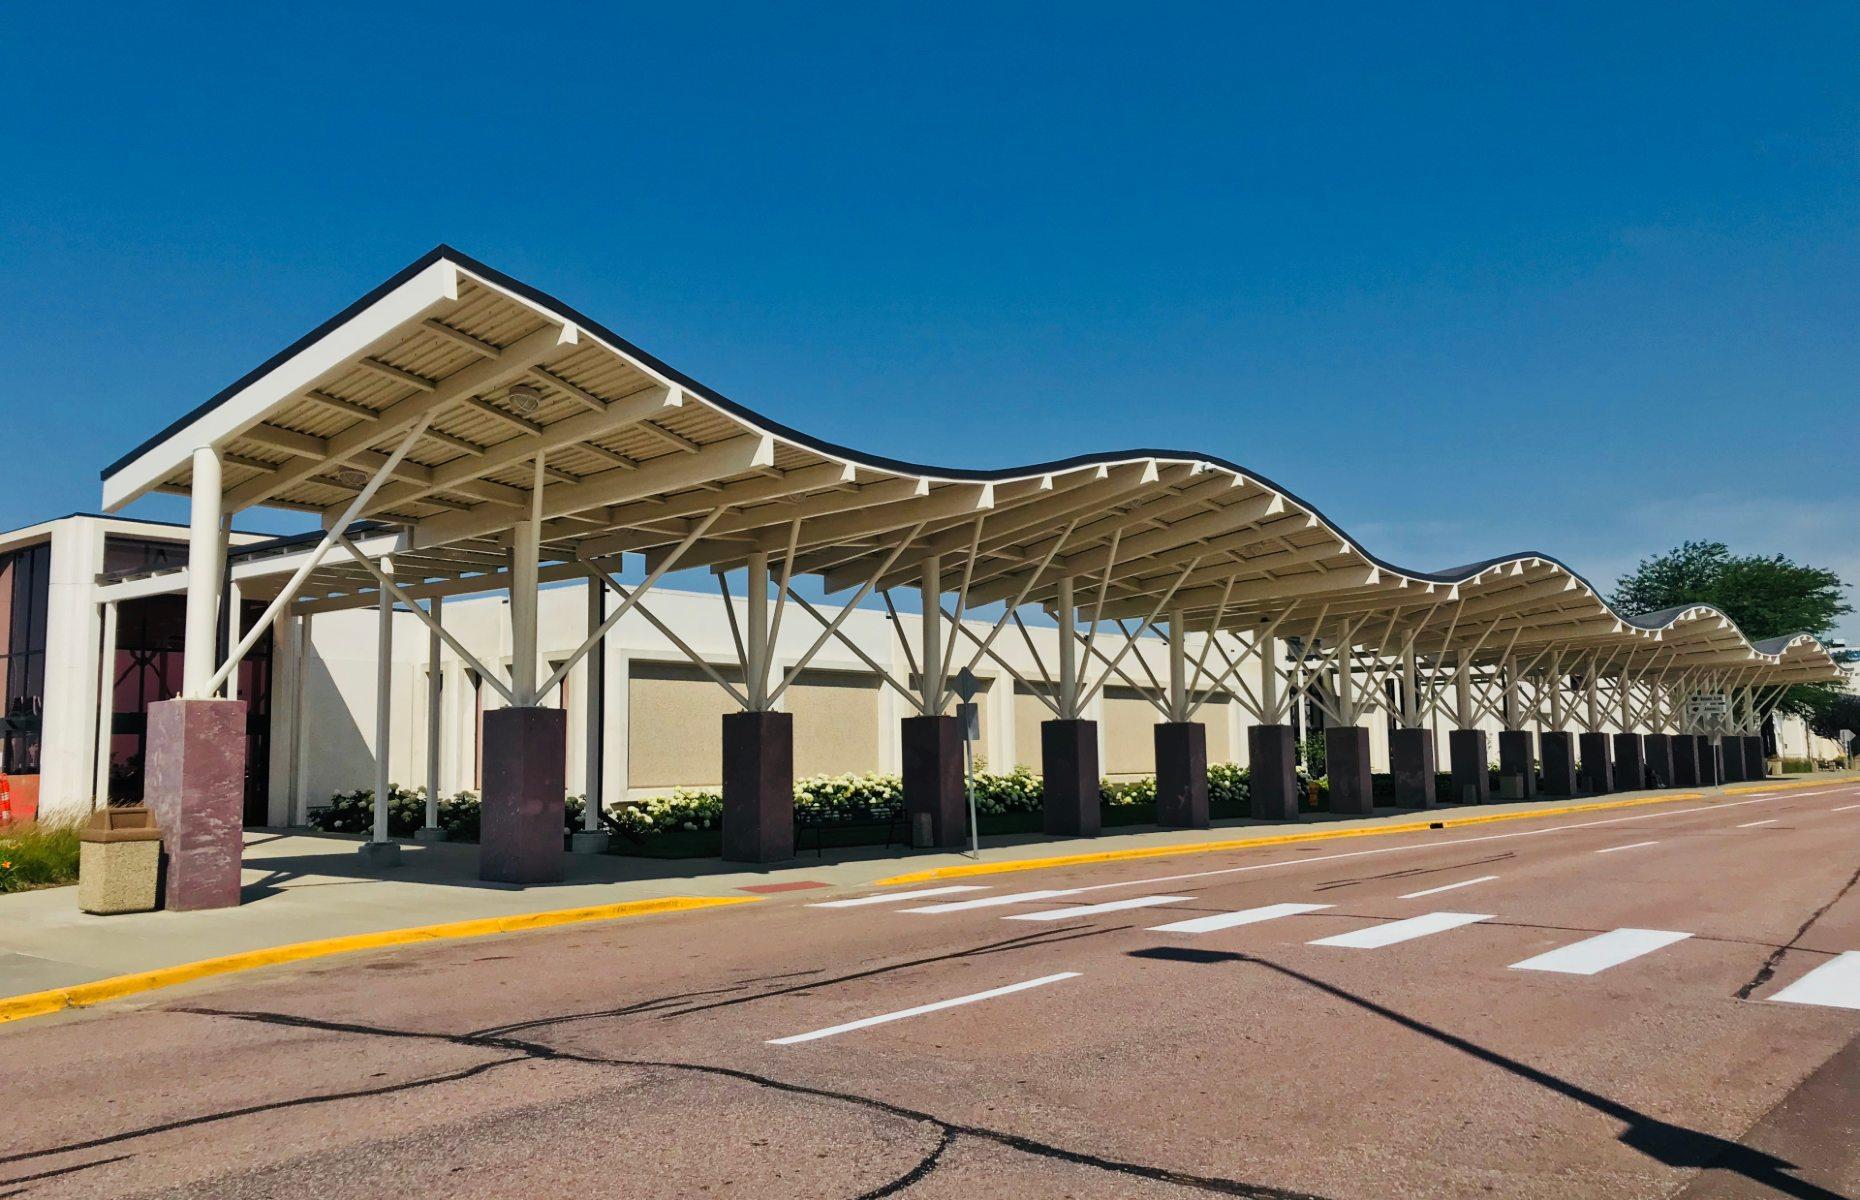 <p>The largest airport in the Mount Rushmore State, <a href="https://www.sfairport.com/">Sioux Falls</a> <a href="https://siouxfallschamber.com/sioux-falls-regional-airport-a-key-forward-sioux-falls-initiative/">served more than half a million passengers in 2019</a>. While that figure dropped substantially in 2020 due to the pandemic, numbers look set to rebound quickly. The regional airfield has become popular thanks to its minimal waiting times, friendly and helpful staff and hassle-free car rental options, <a href="https://www.yelp.com/biz/sioux-falls-regional-airport-fsd-sioux-falls?start=10">although some flyers note</a> that dining options are a little thin on the ground. </p>